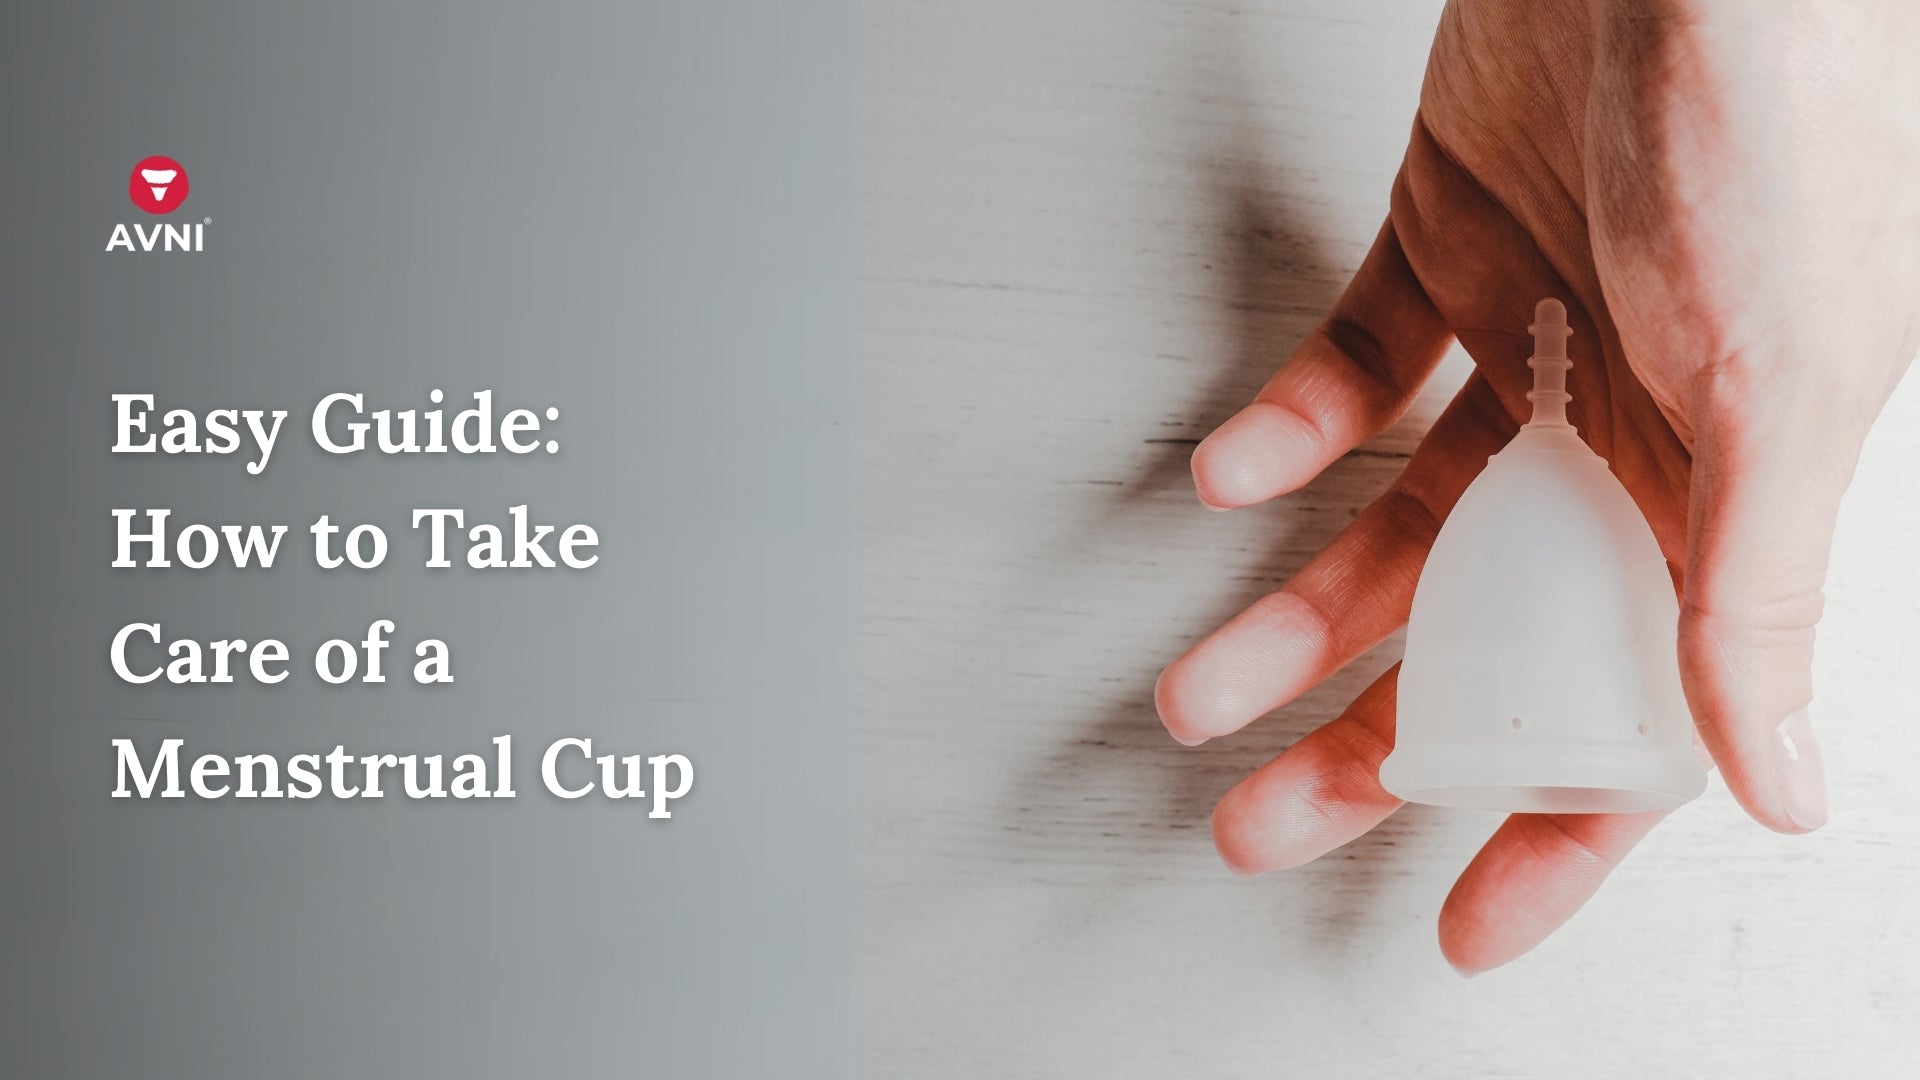 Easy Guide: How to Take Care of a Menstrual Cup